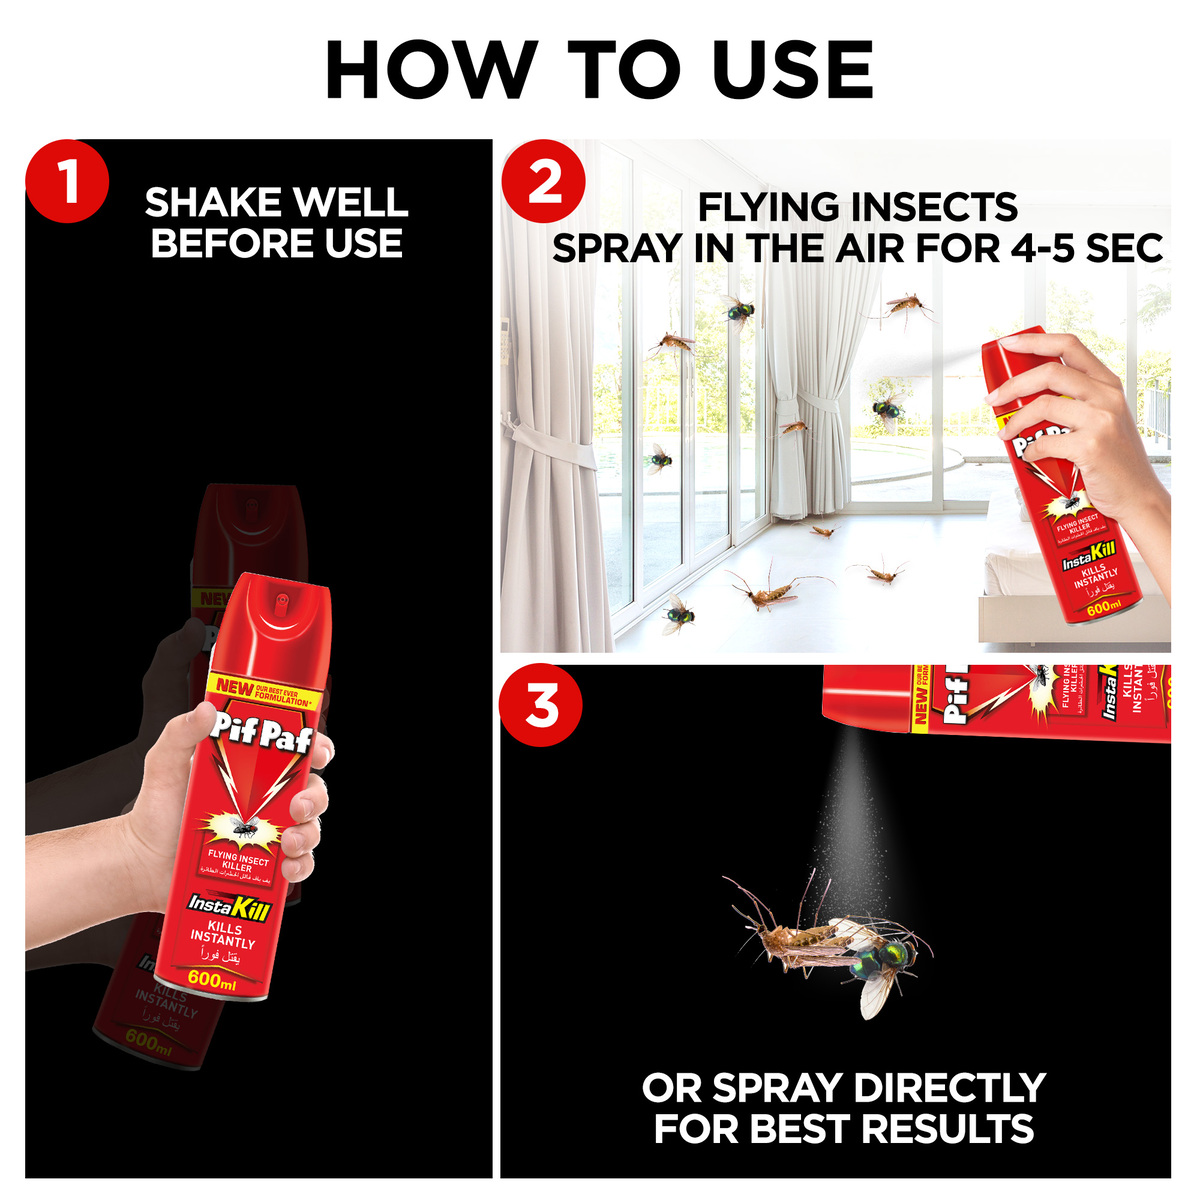 Pif Paf Power Guard Crawling Insect Killer 600 ml